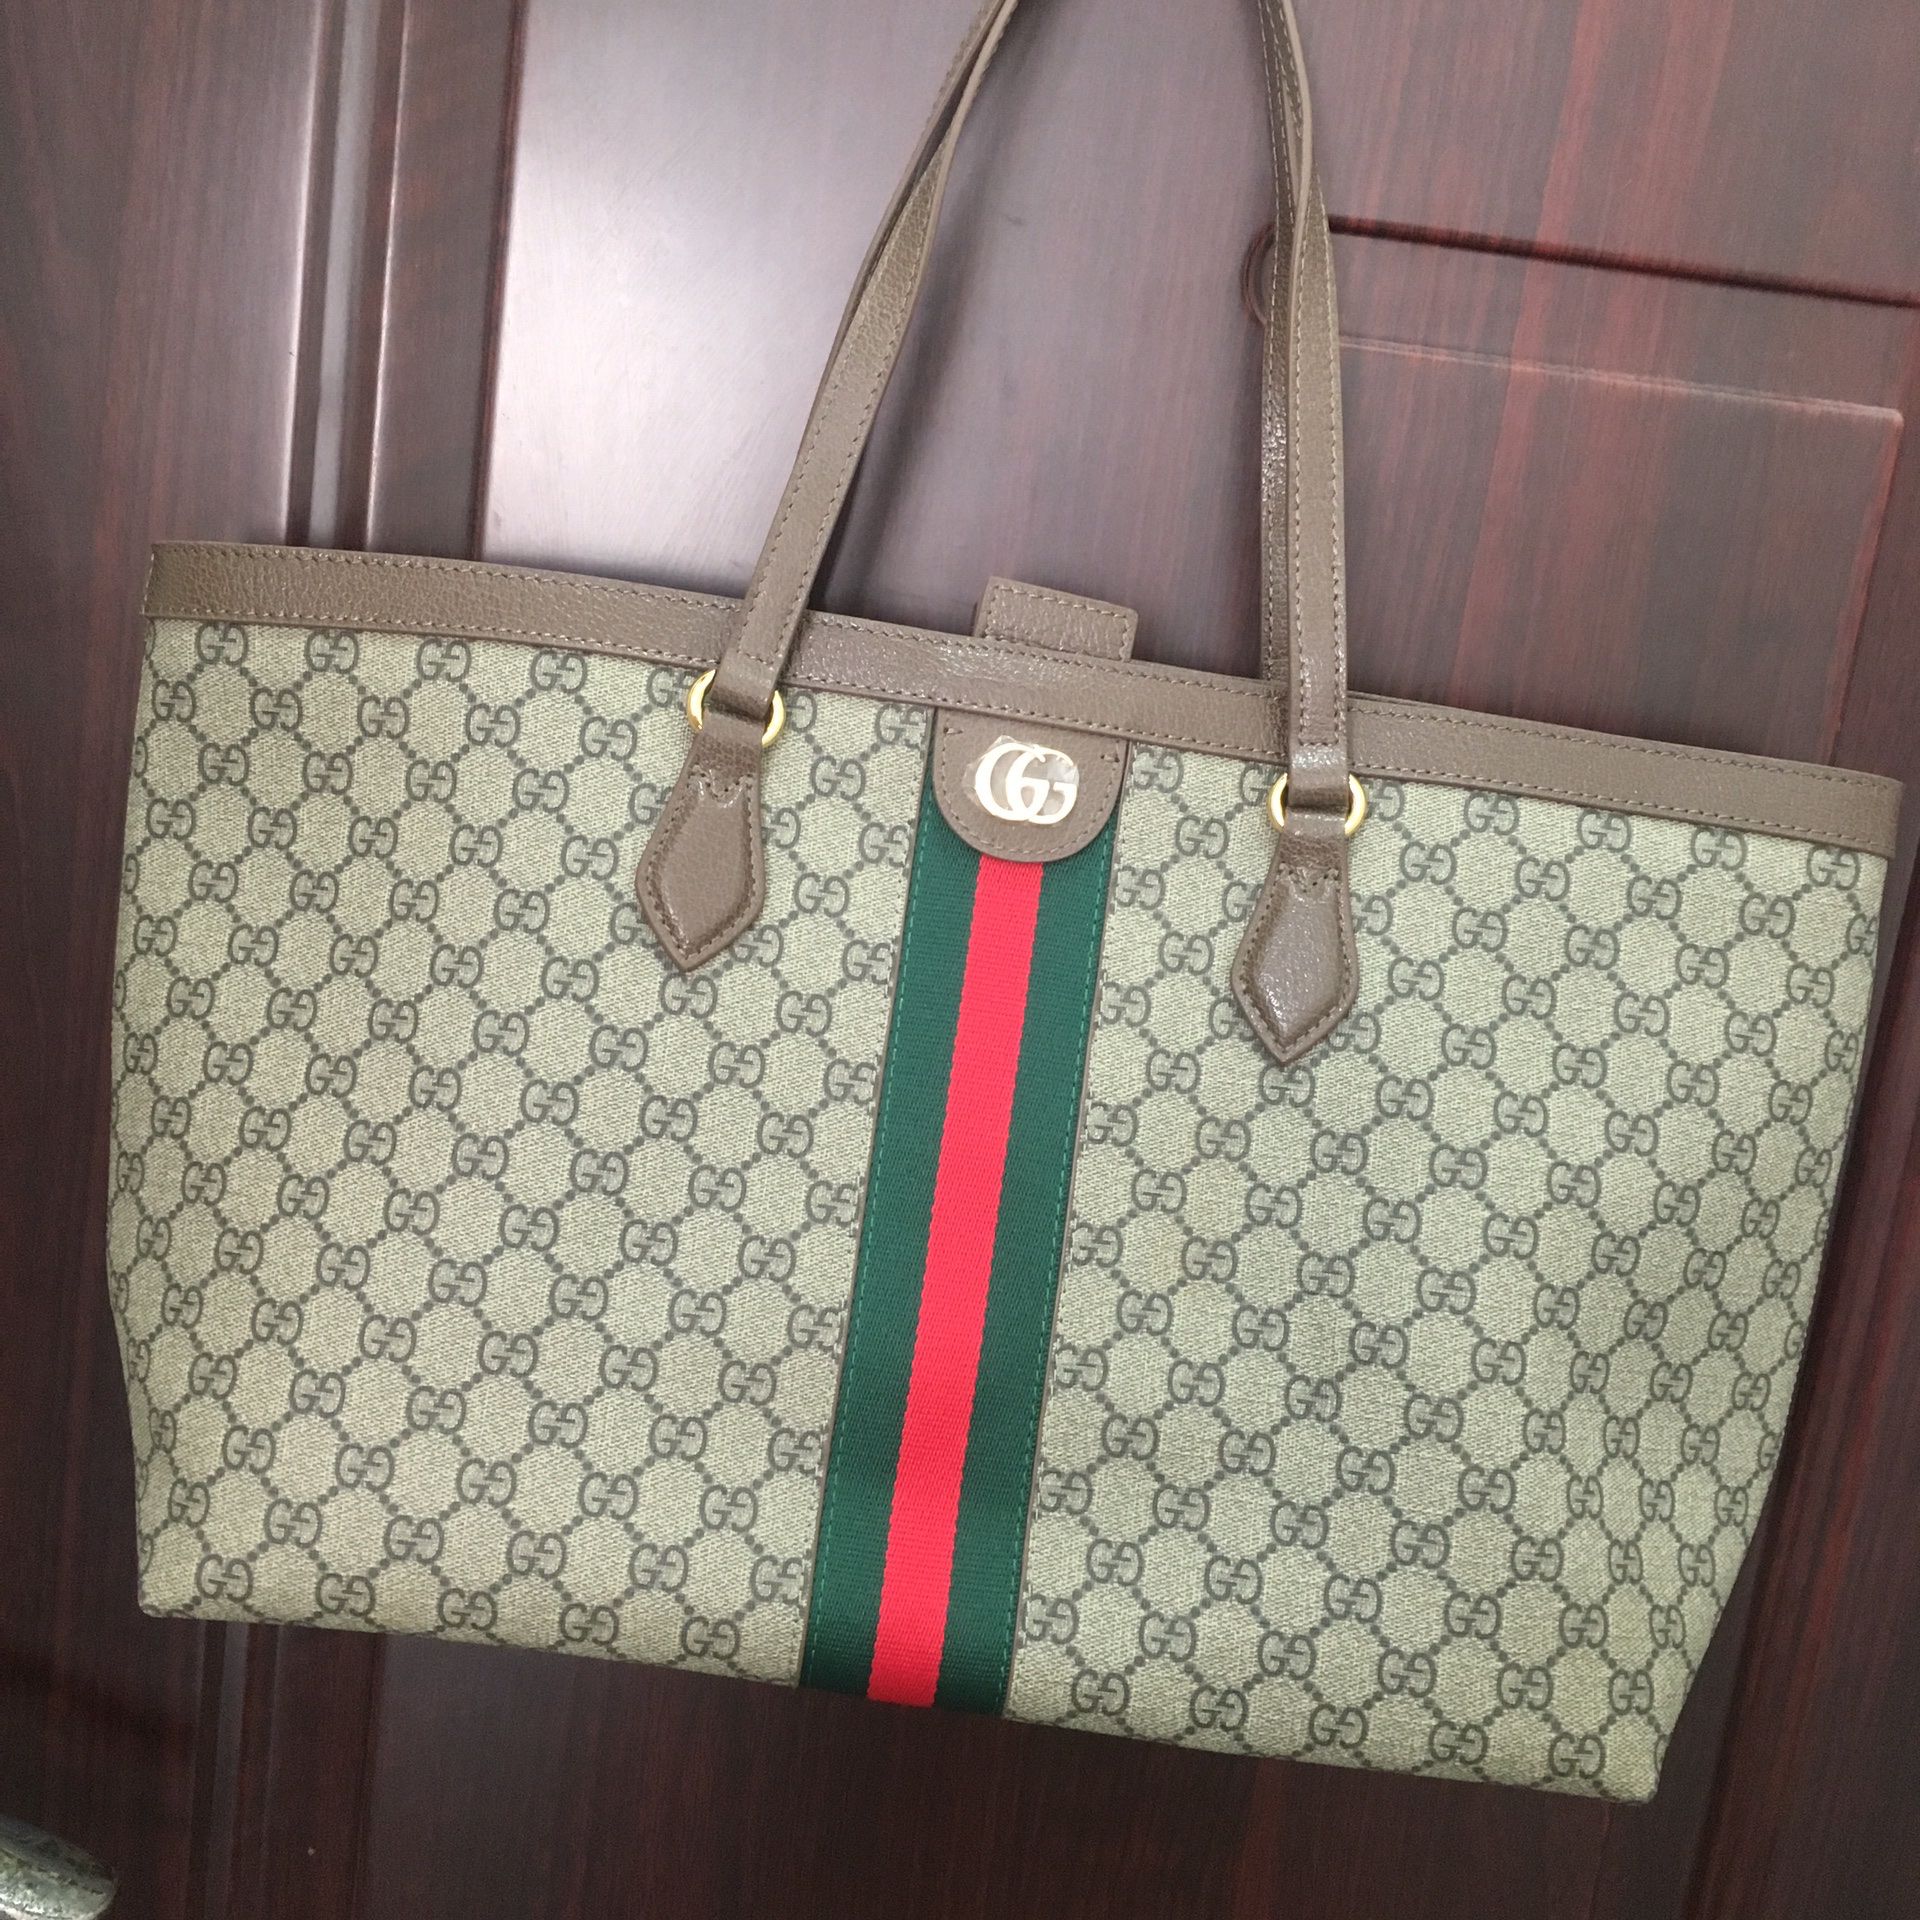 Ærlighed prins dyr Authentic Gucci Bags Gucci GG Supreme Ophidia Shopping Tote for Sale in  Littleville, AL - OfferUp